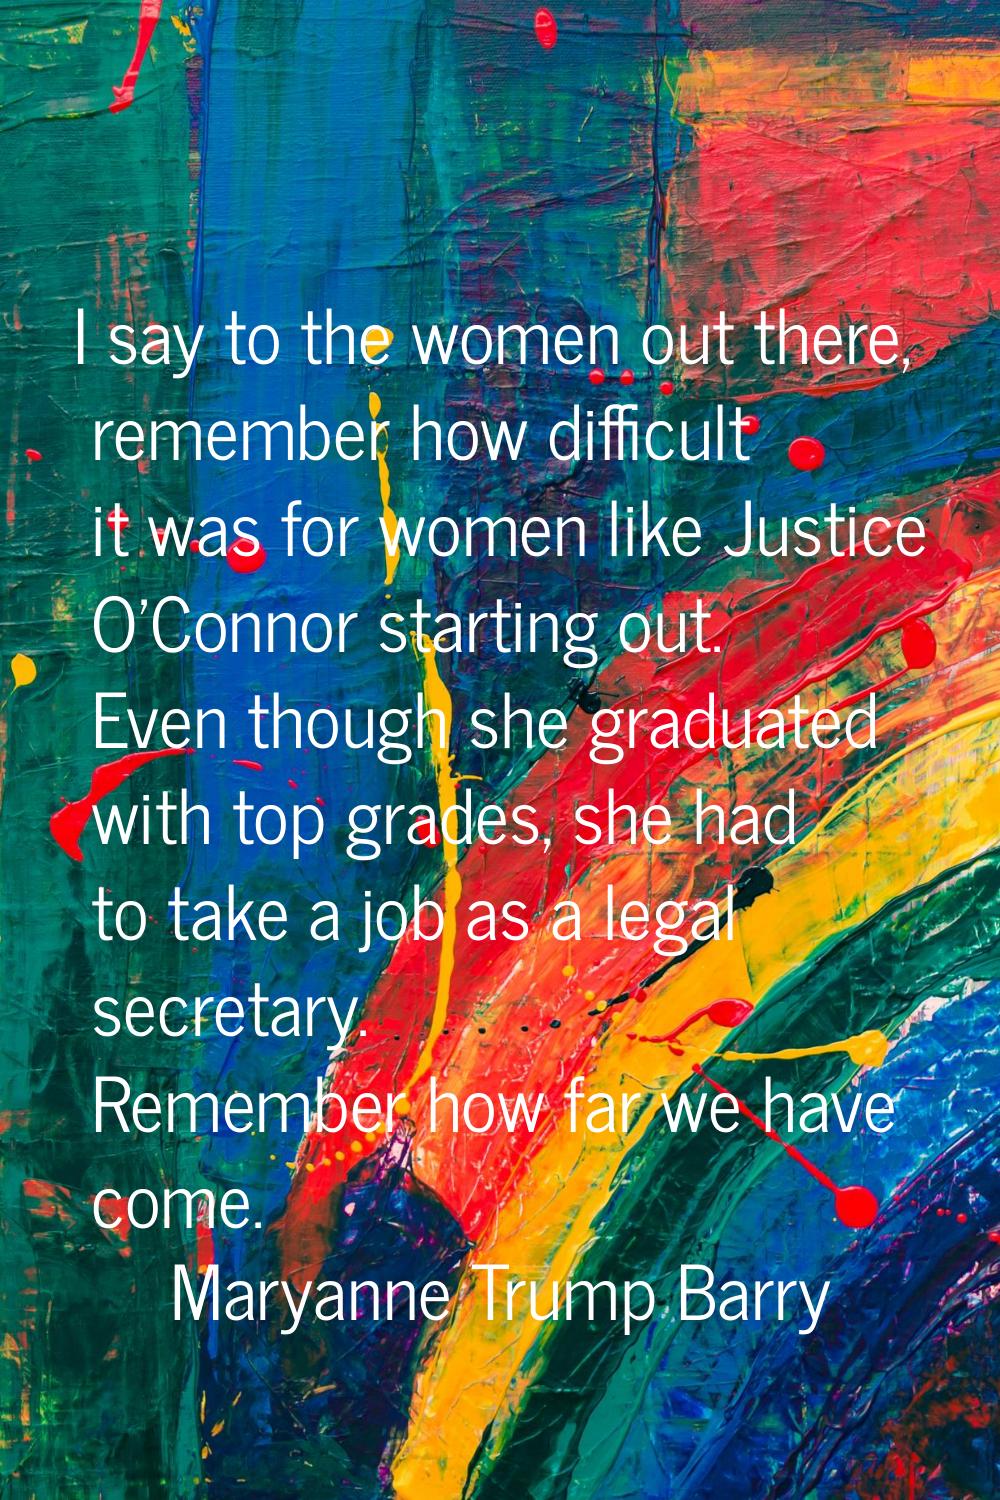 I say to the women out there, remember how difficult it was for women like Justice O'Connor startin